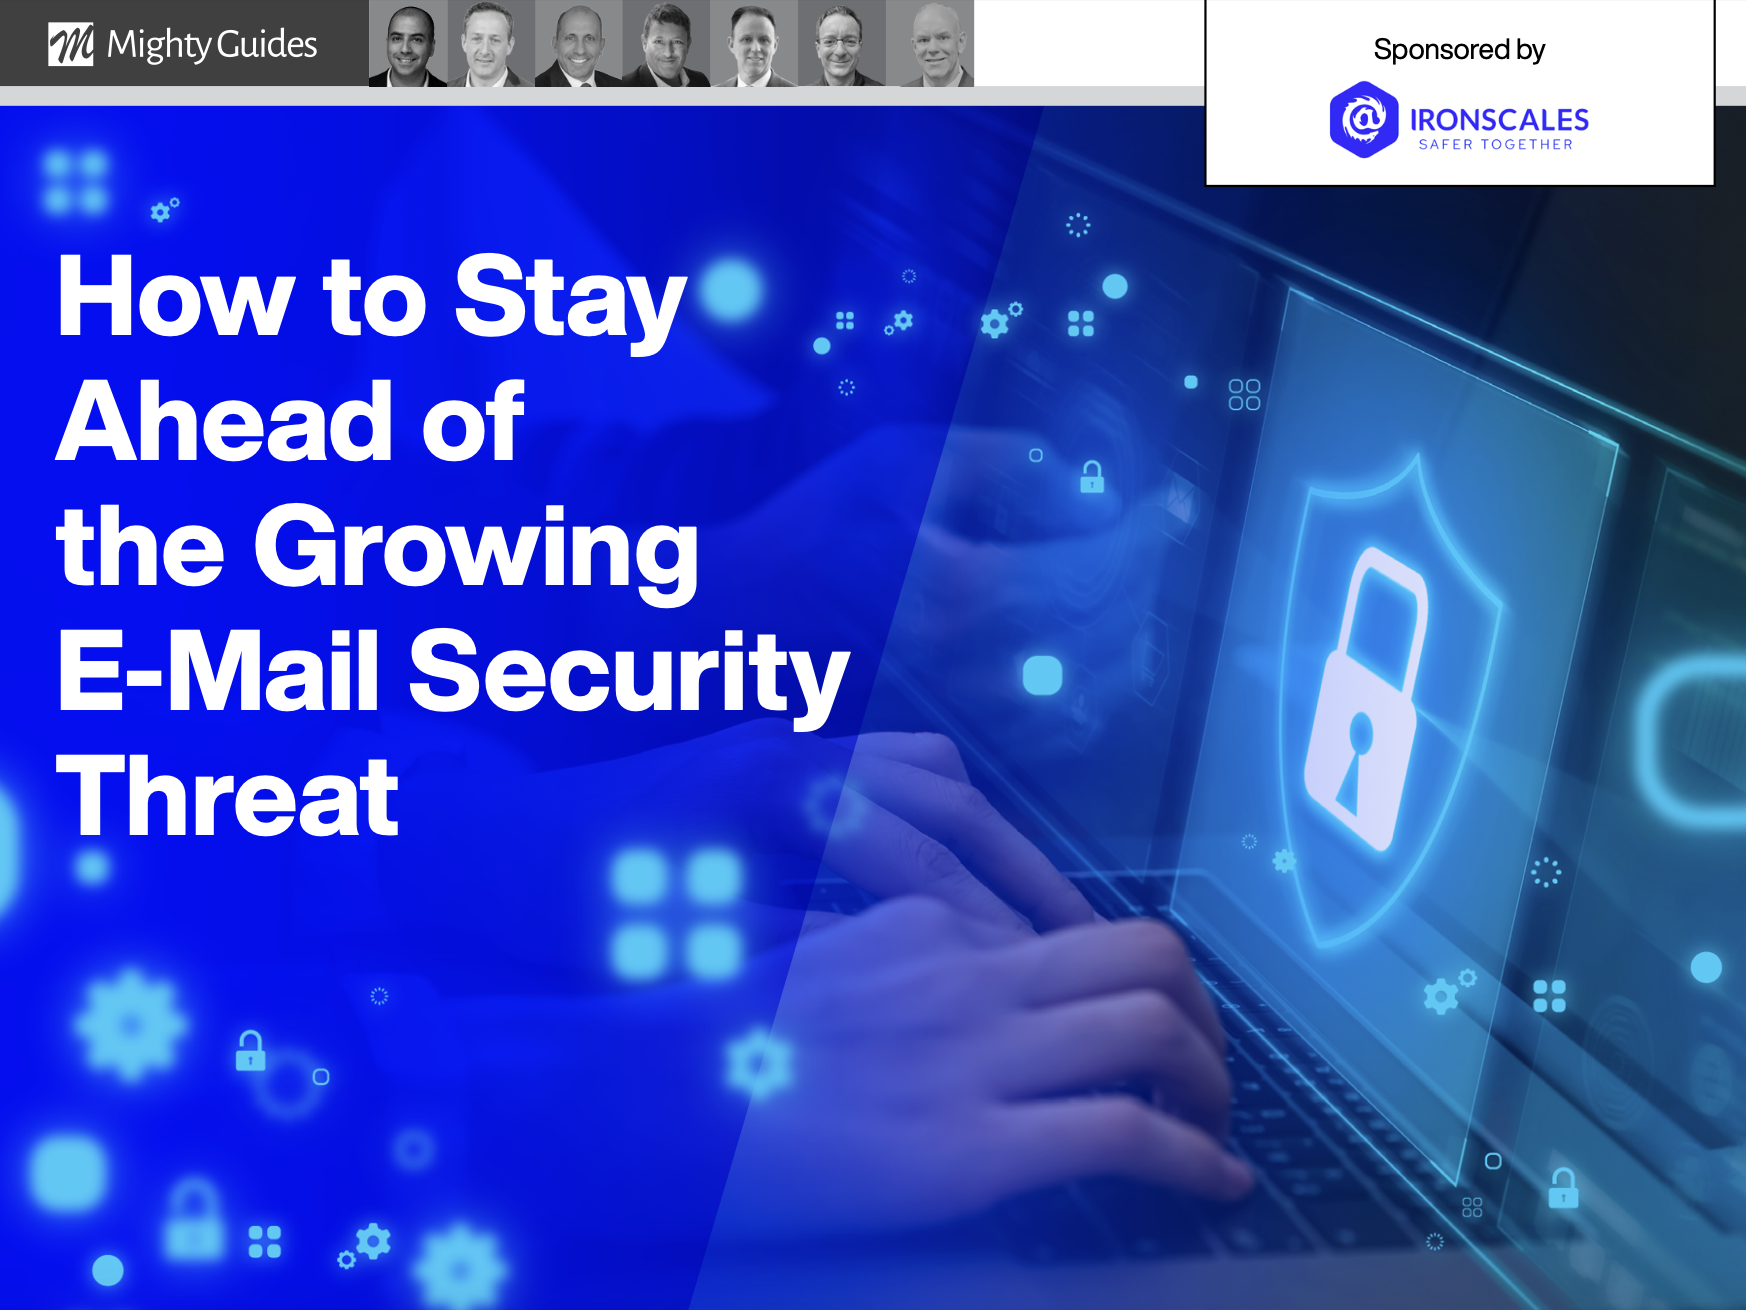 IRONSCALES: How to Stay Ahead of the Growing E-mail Security Threat